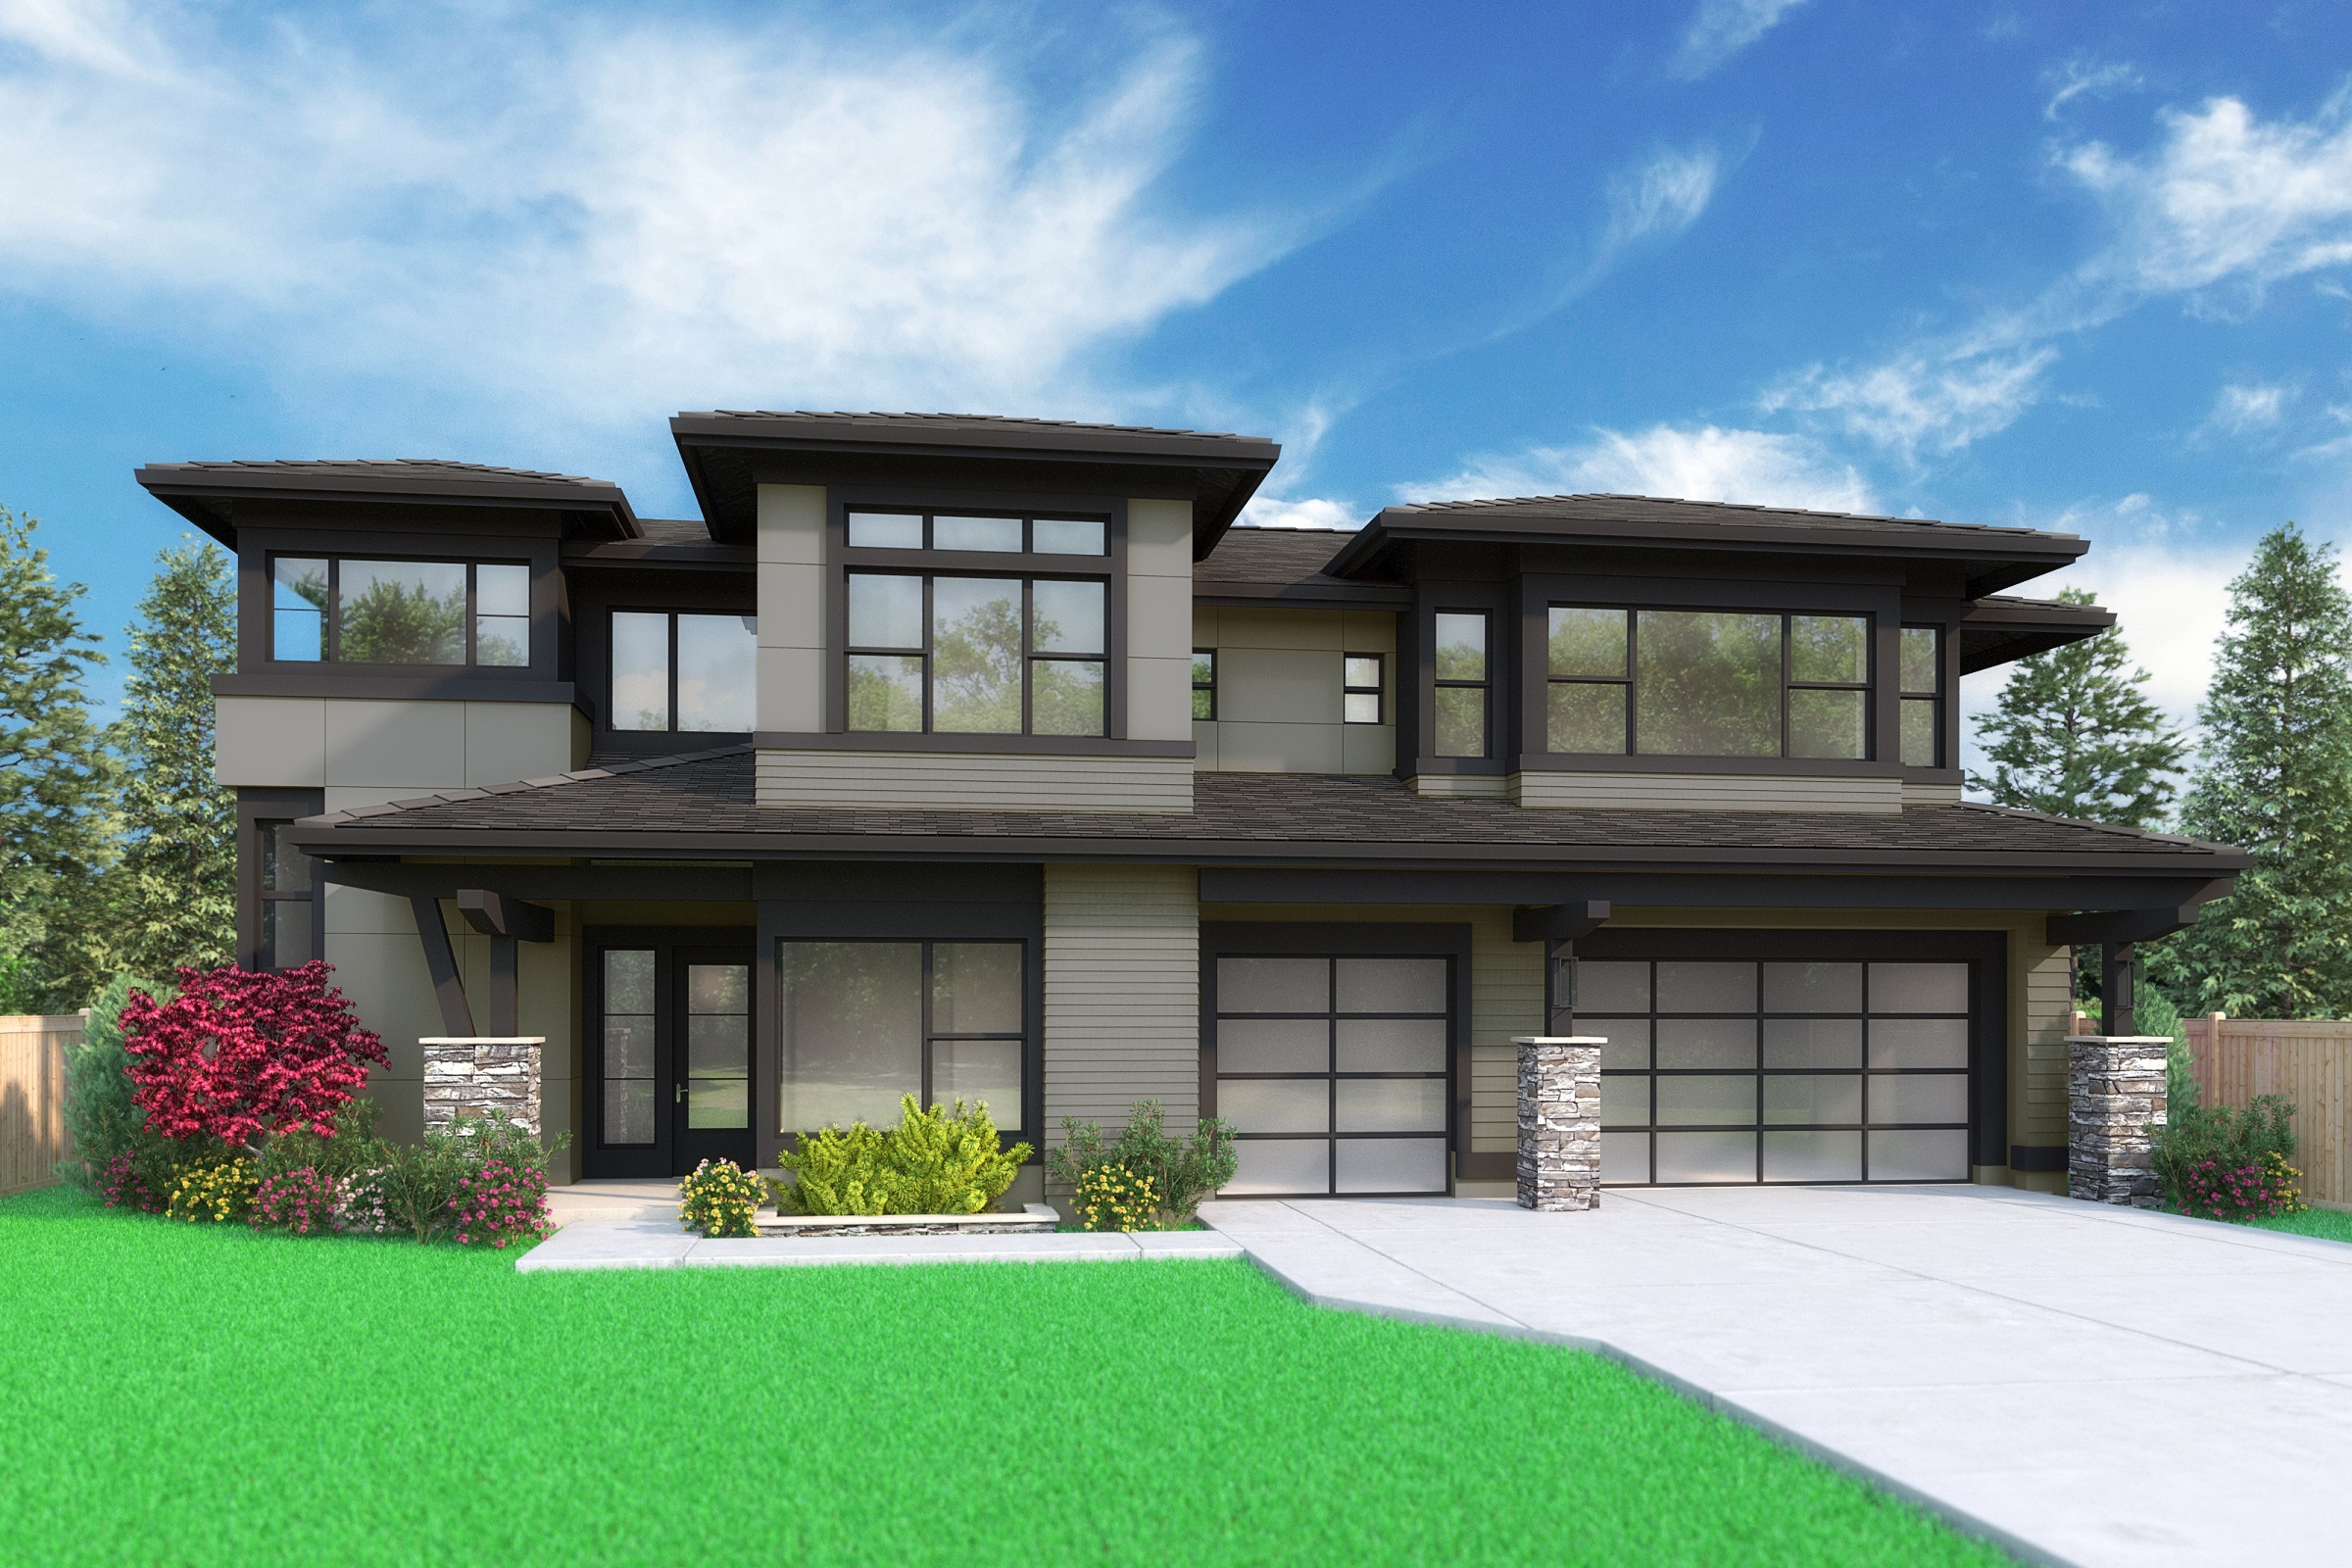 View our new luxury home construction on 4069 152nd Ave SE, in Bellevue, WA from MN Custom Homes